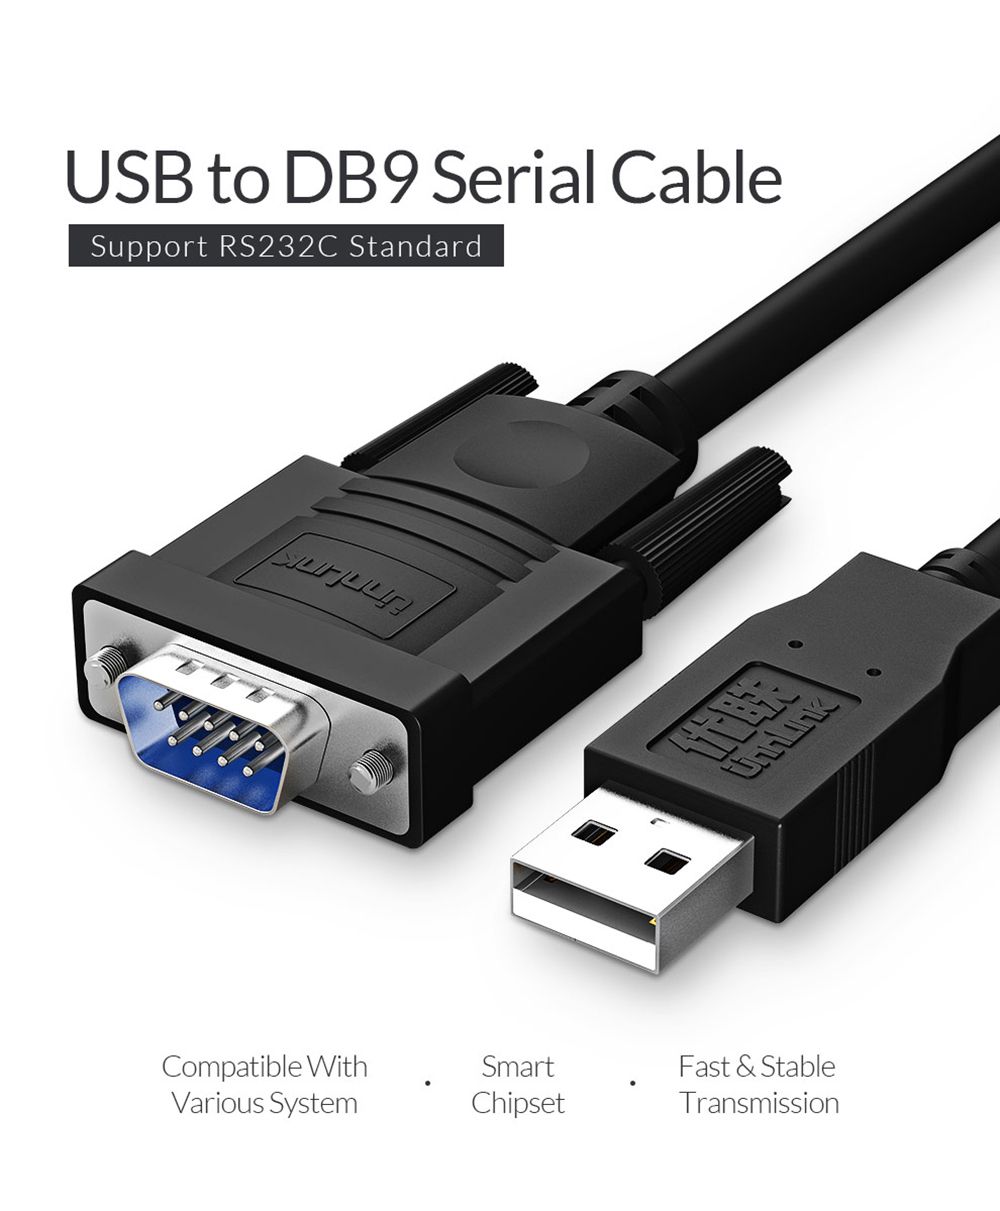 Unnlink-USB-to-DB9-RS232-Serial-Cable-Adapter-USB-COM-Port-DB9-Pin-Cable-RS232-For-Printer-LED-POS-1663125